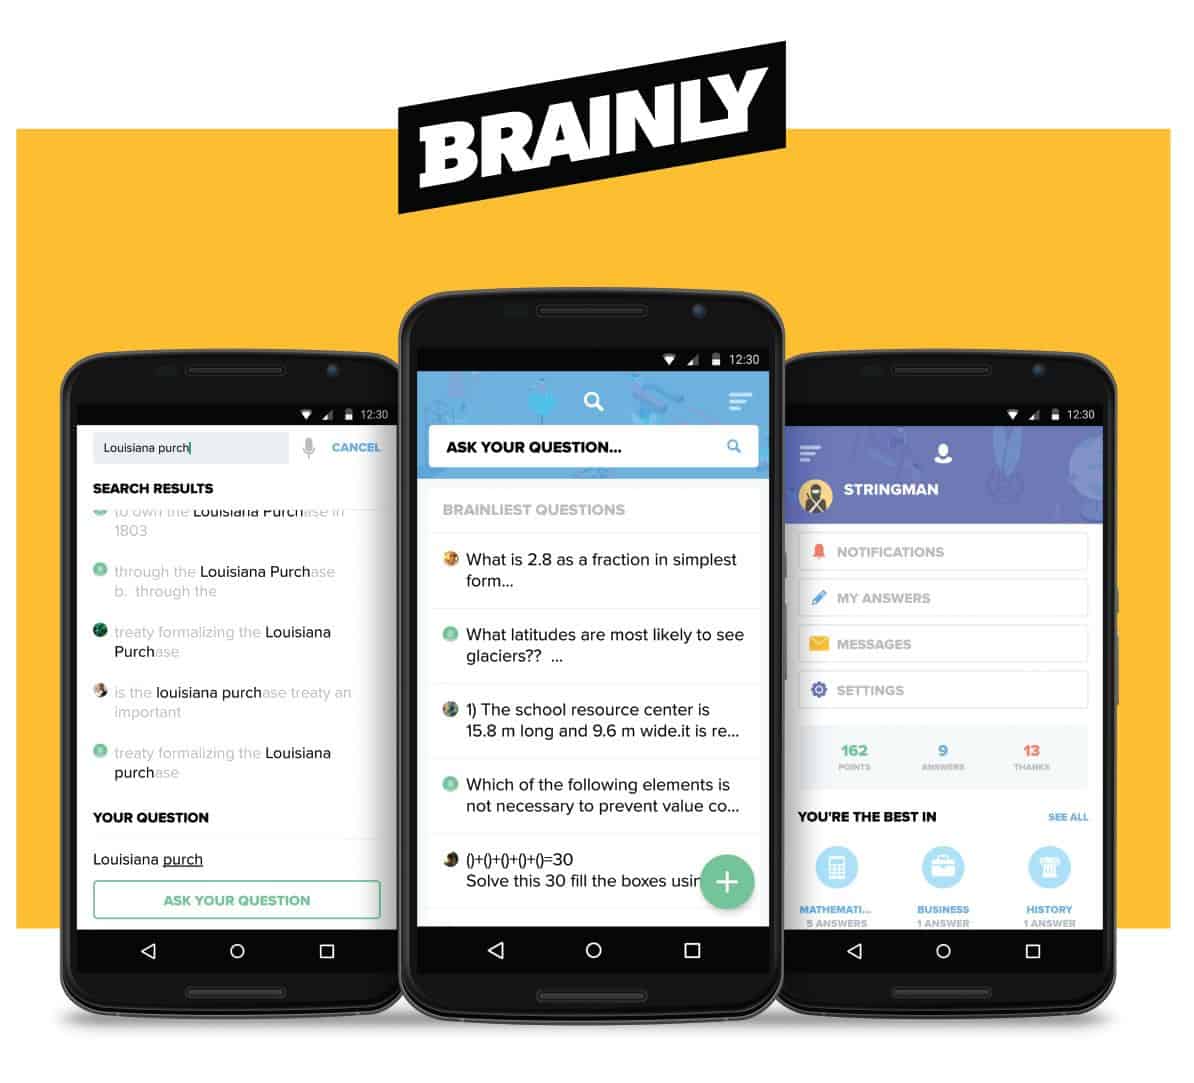 Screenshots of the Android app UI design of Brainly, a collaborative learning platform for students.